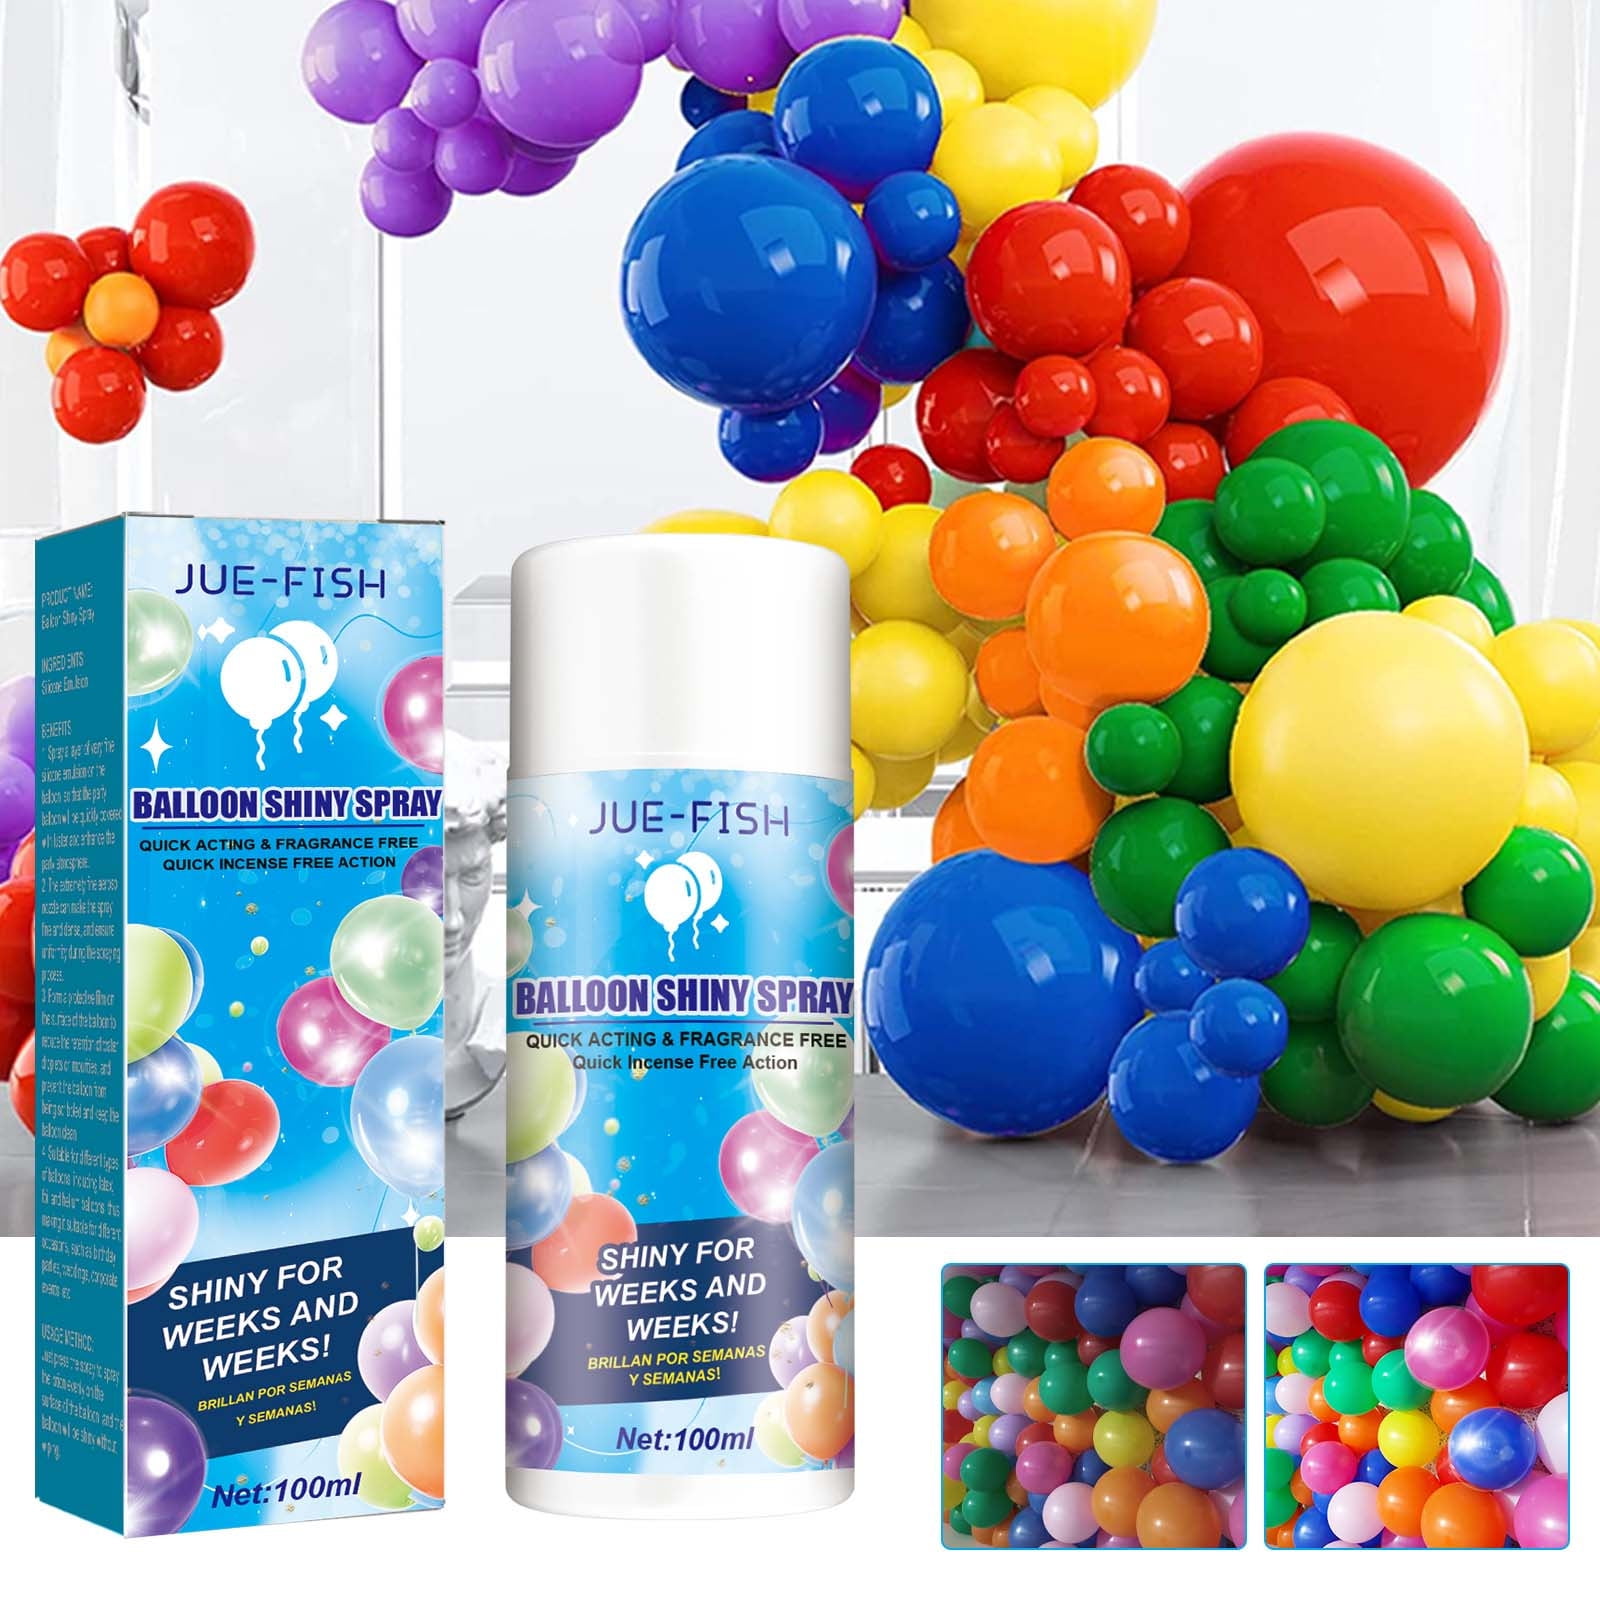 Have you ever heard of using HAIR SPRAY to shine balloons? Because iss, Balloon Decoration